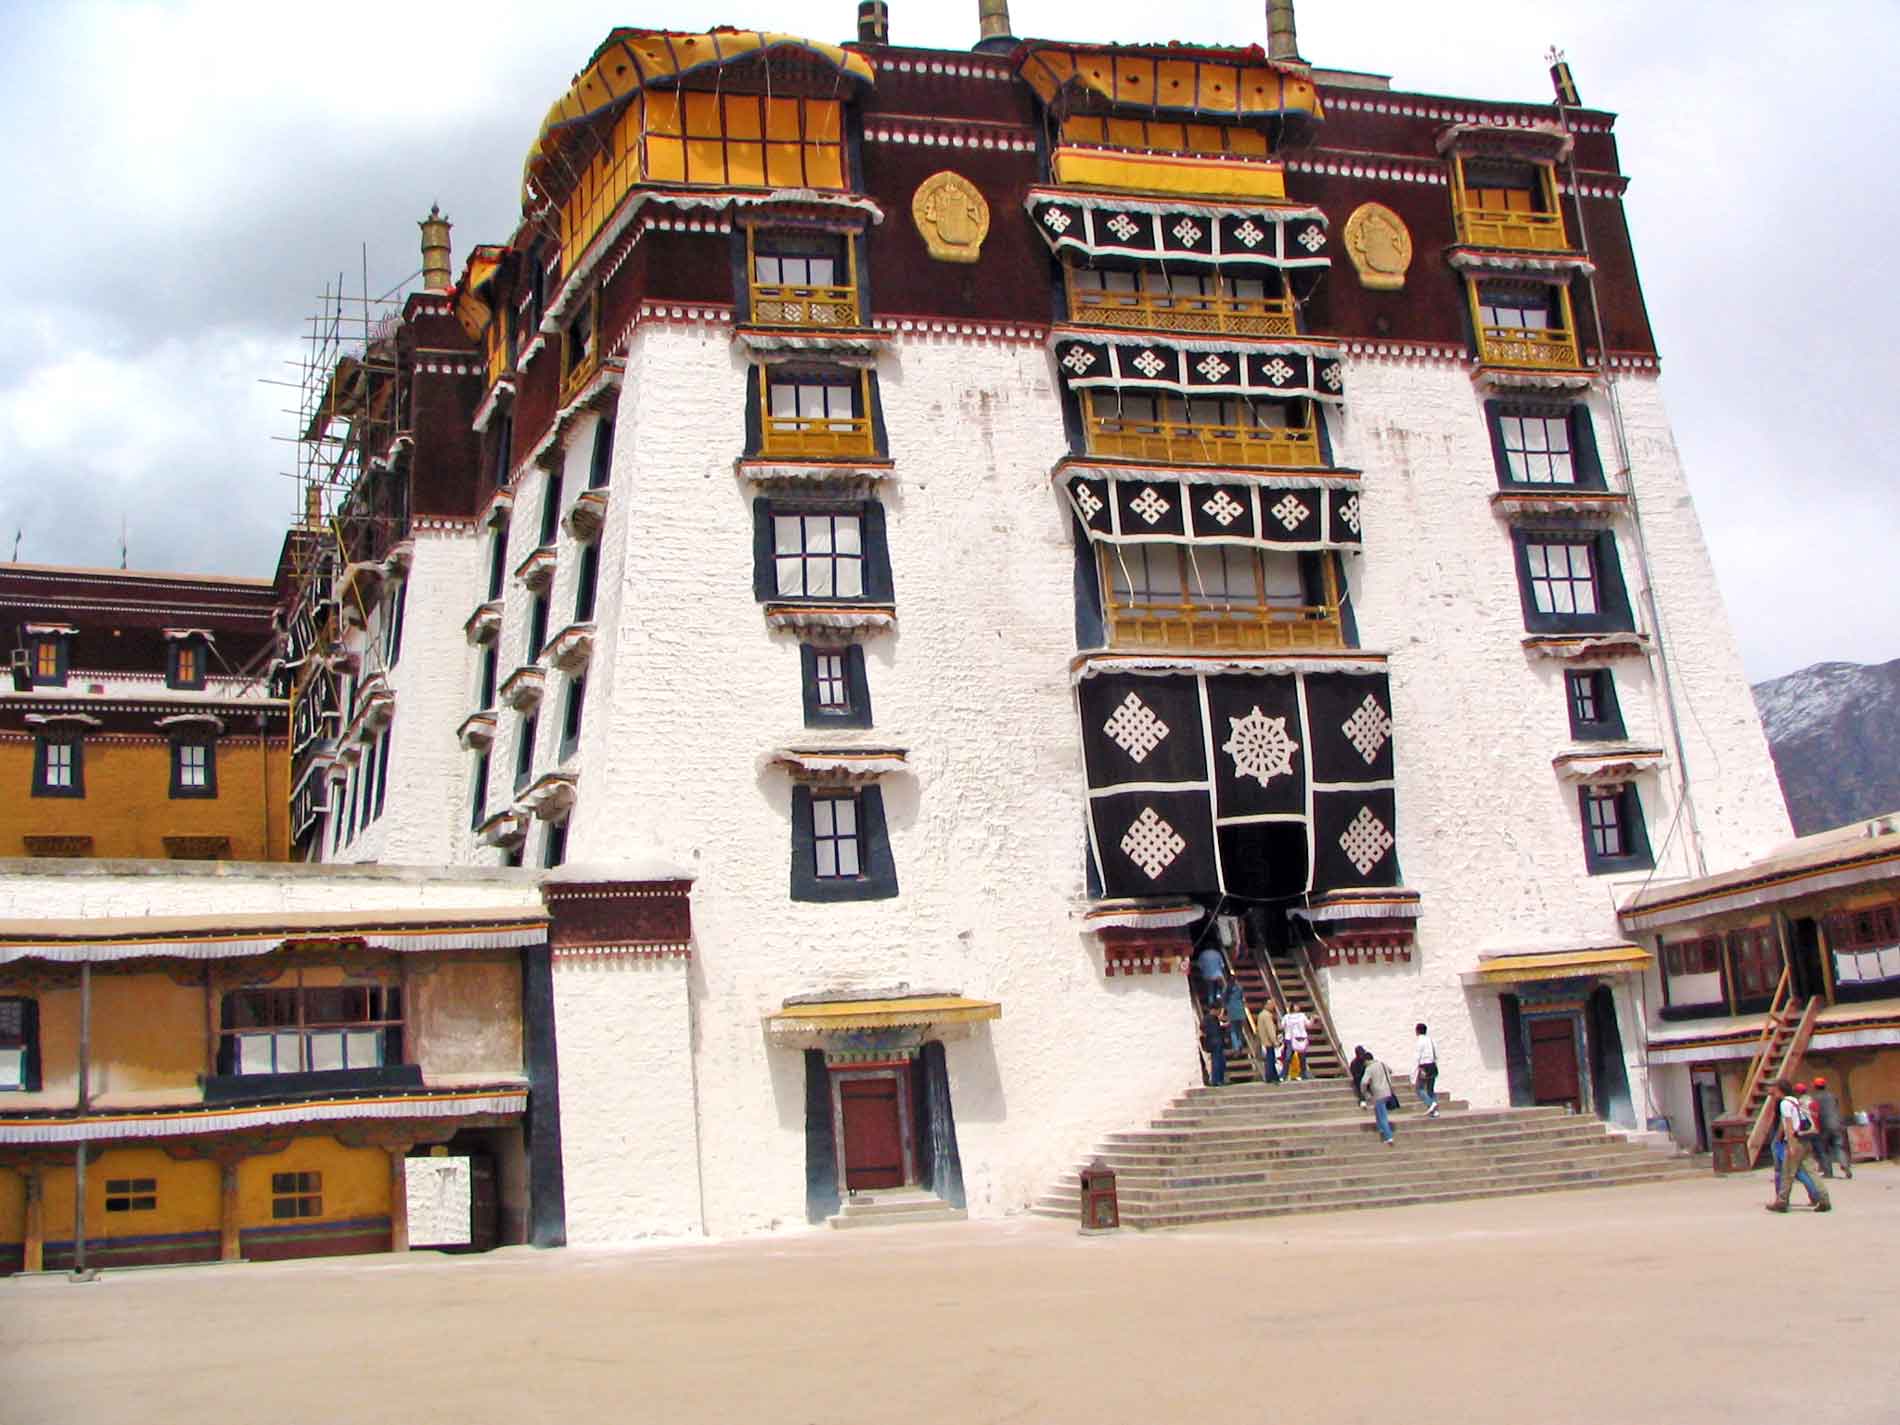 The Entrance To The Potala Palace In Lhasa